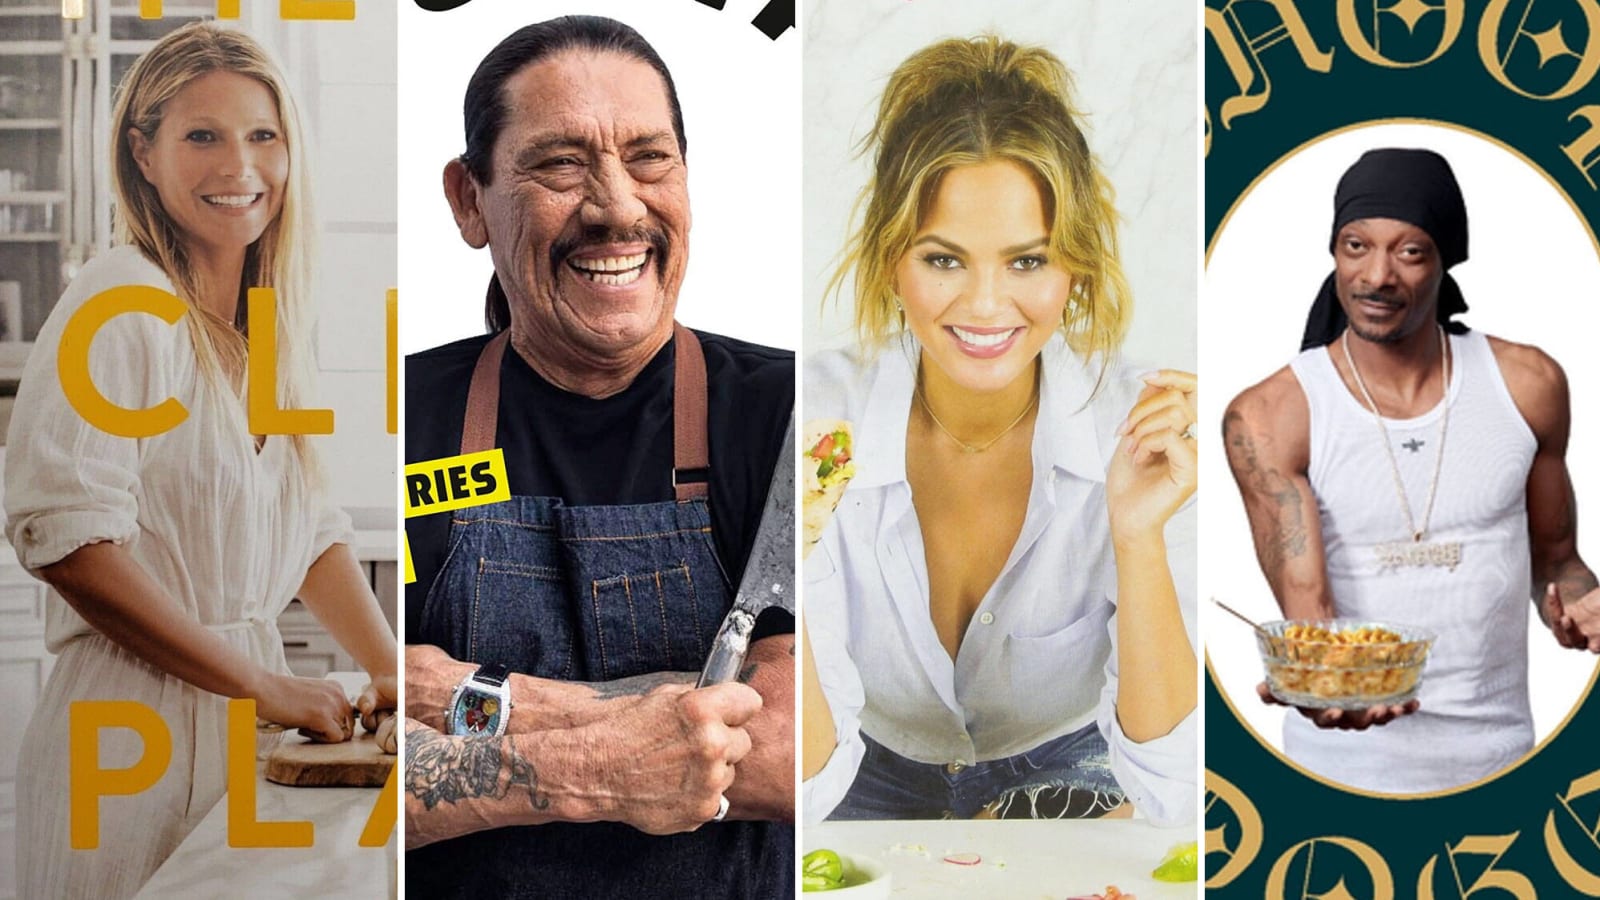 Every kitchen should have these 25 celebrity cookbooks